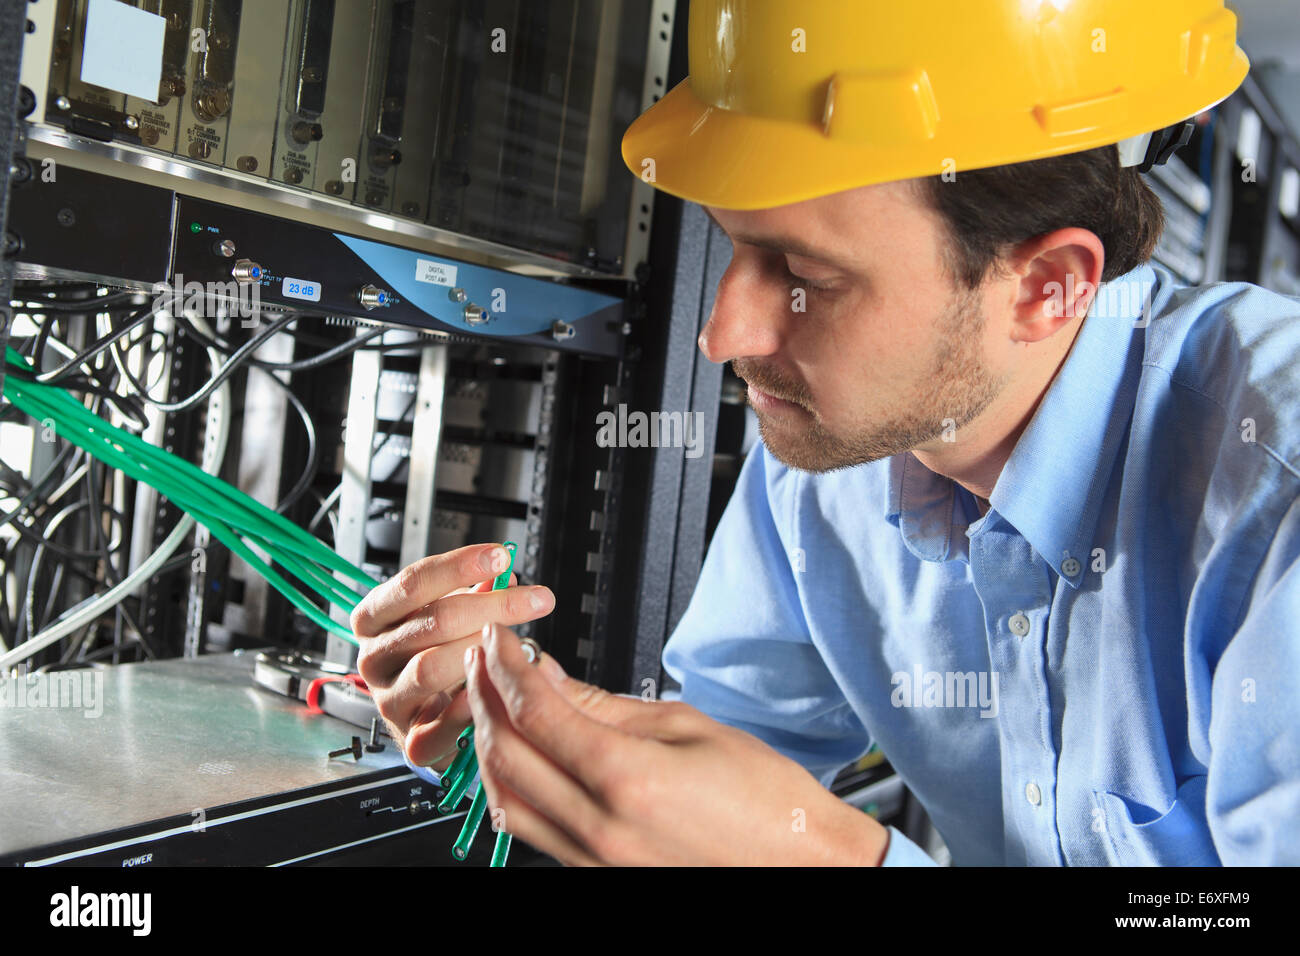 Network engineer examining cable for termination Stock Photo